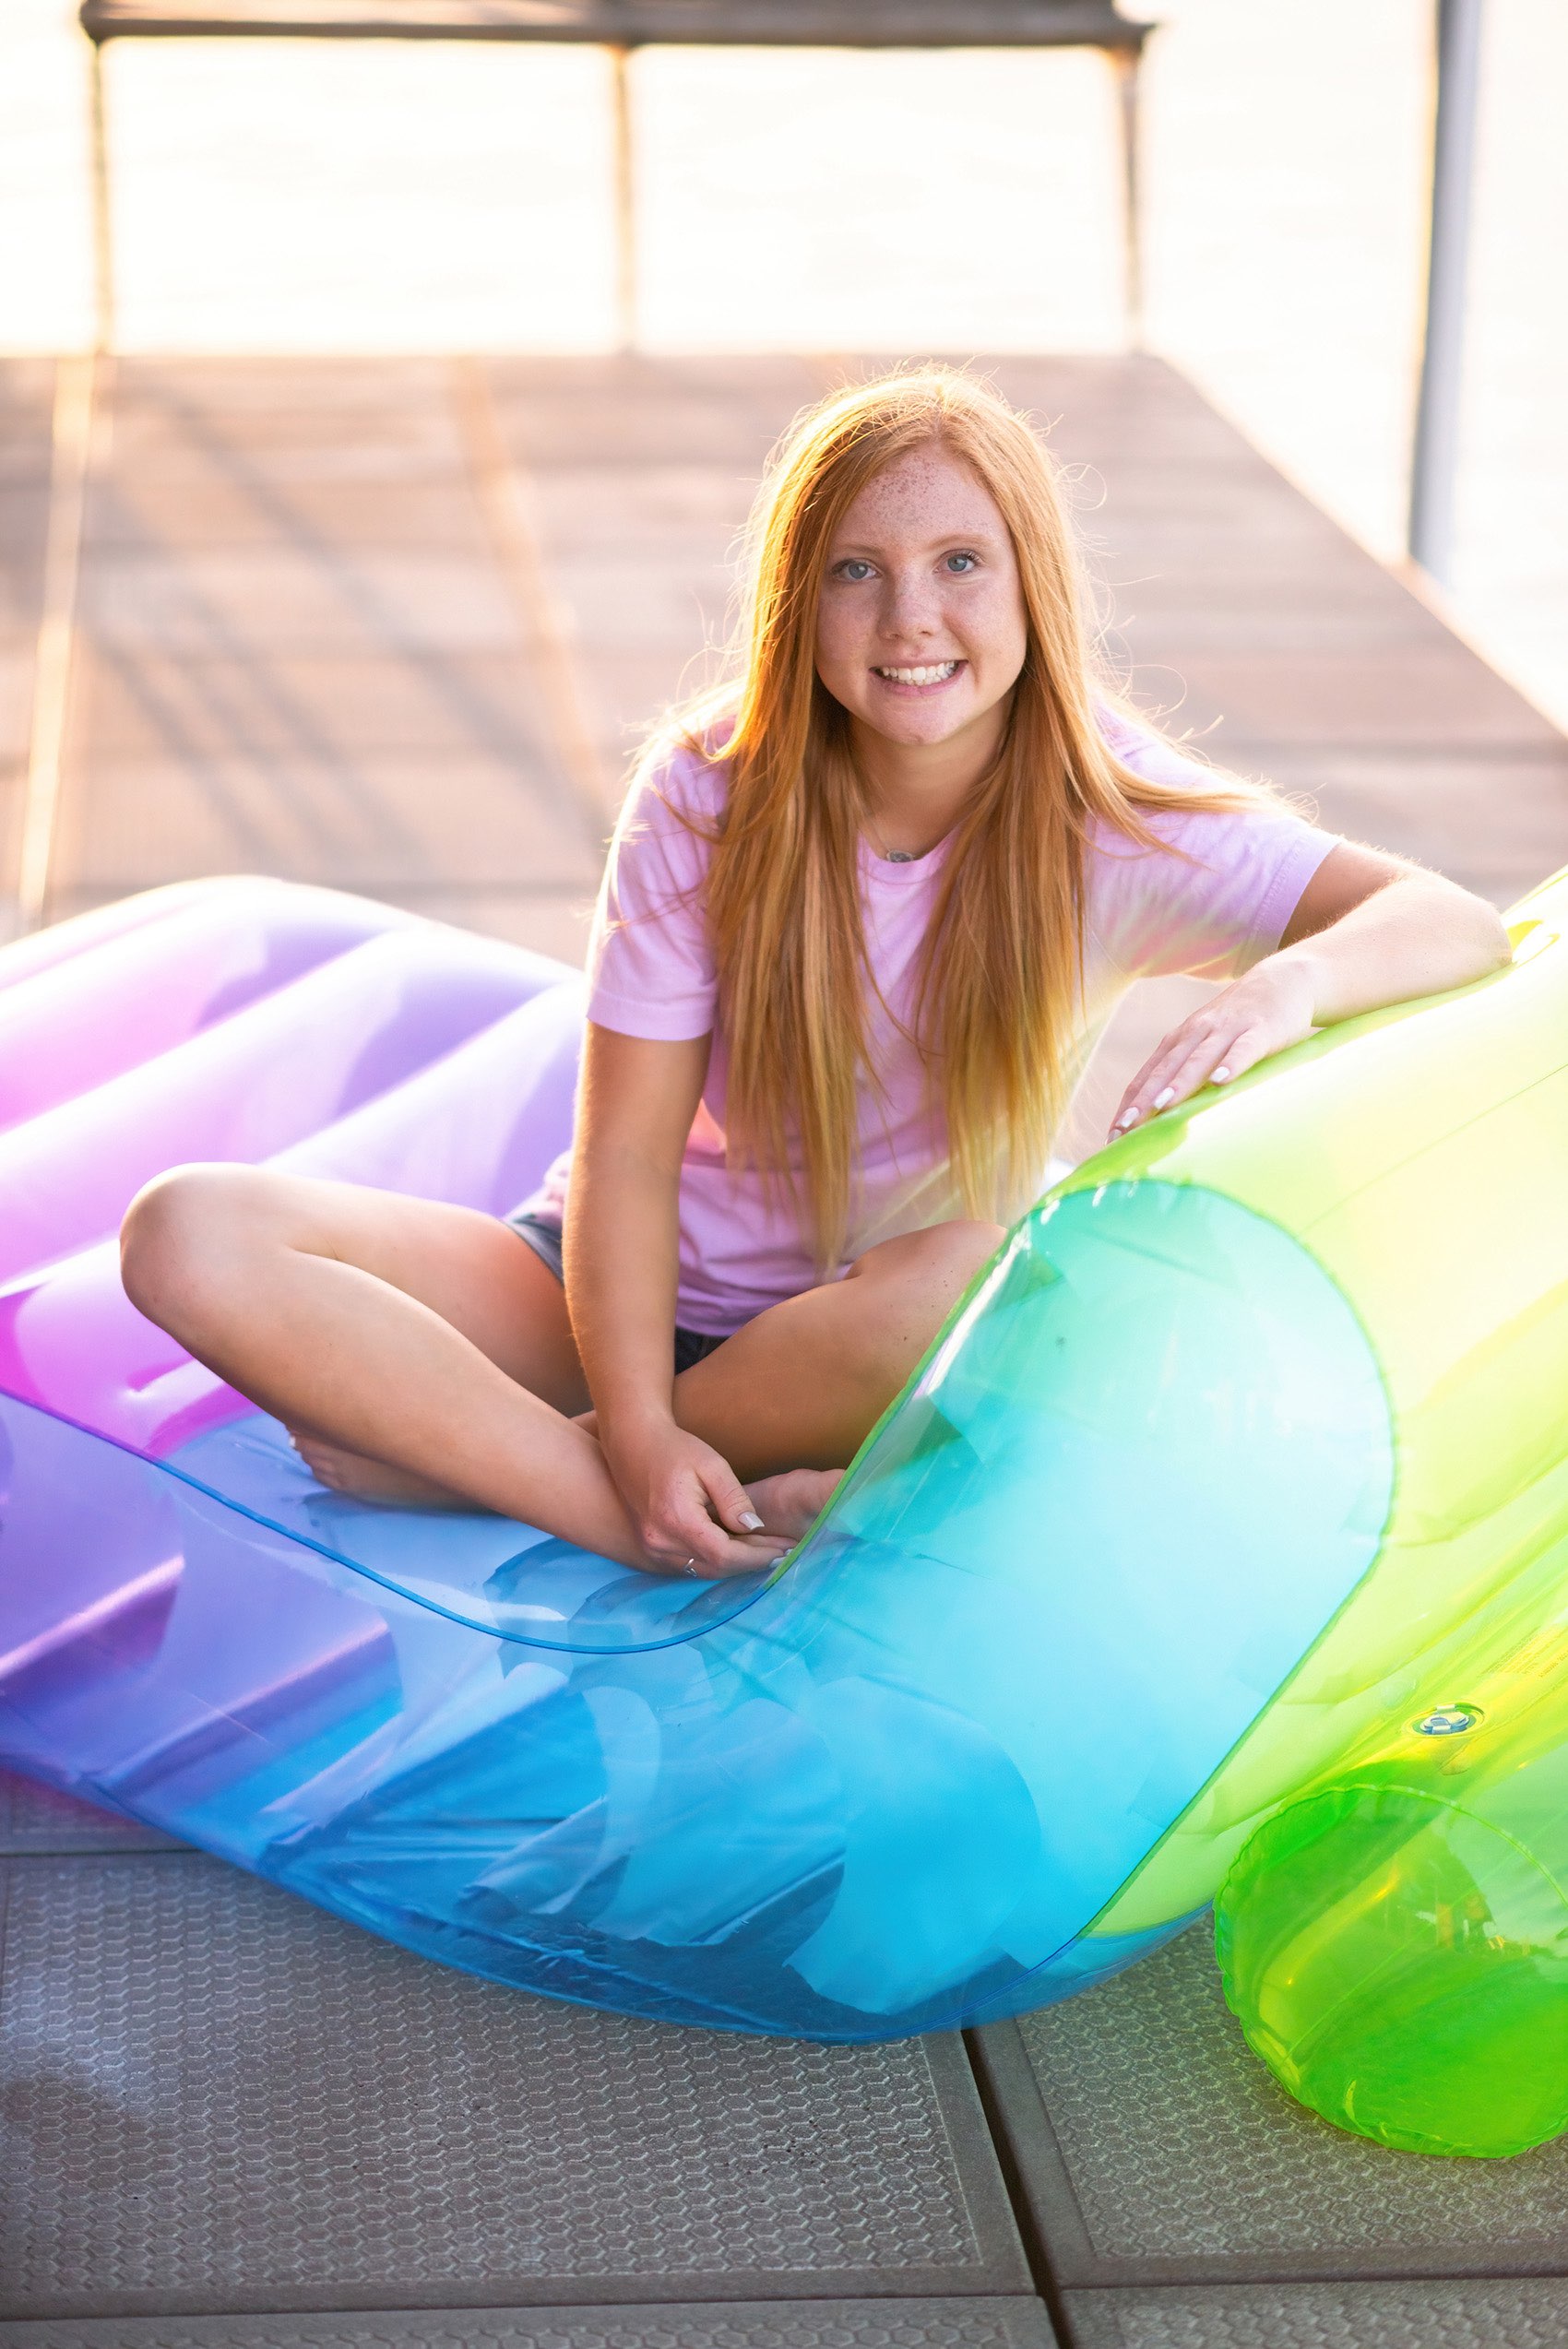 Senior girl in pink tshirt sitting on rainbow colored lounge chair.